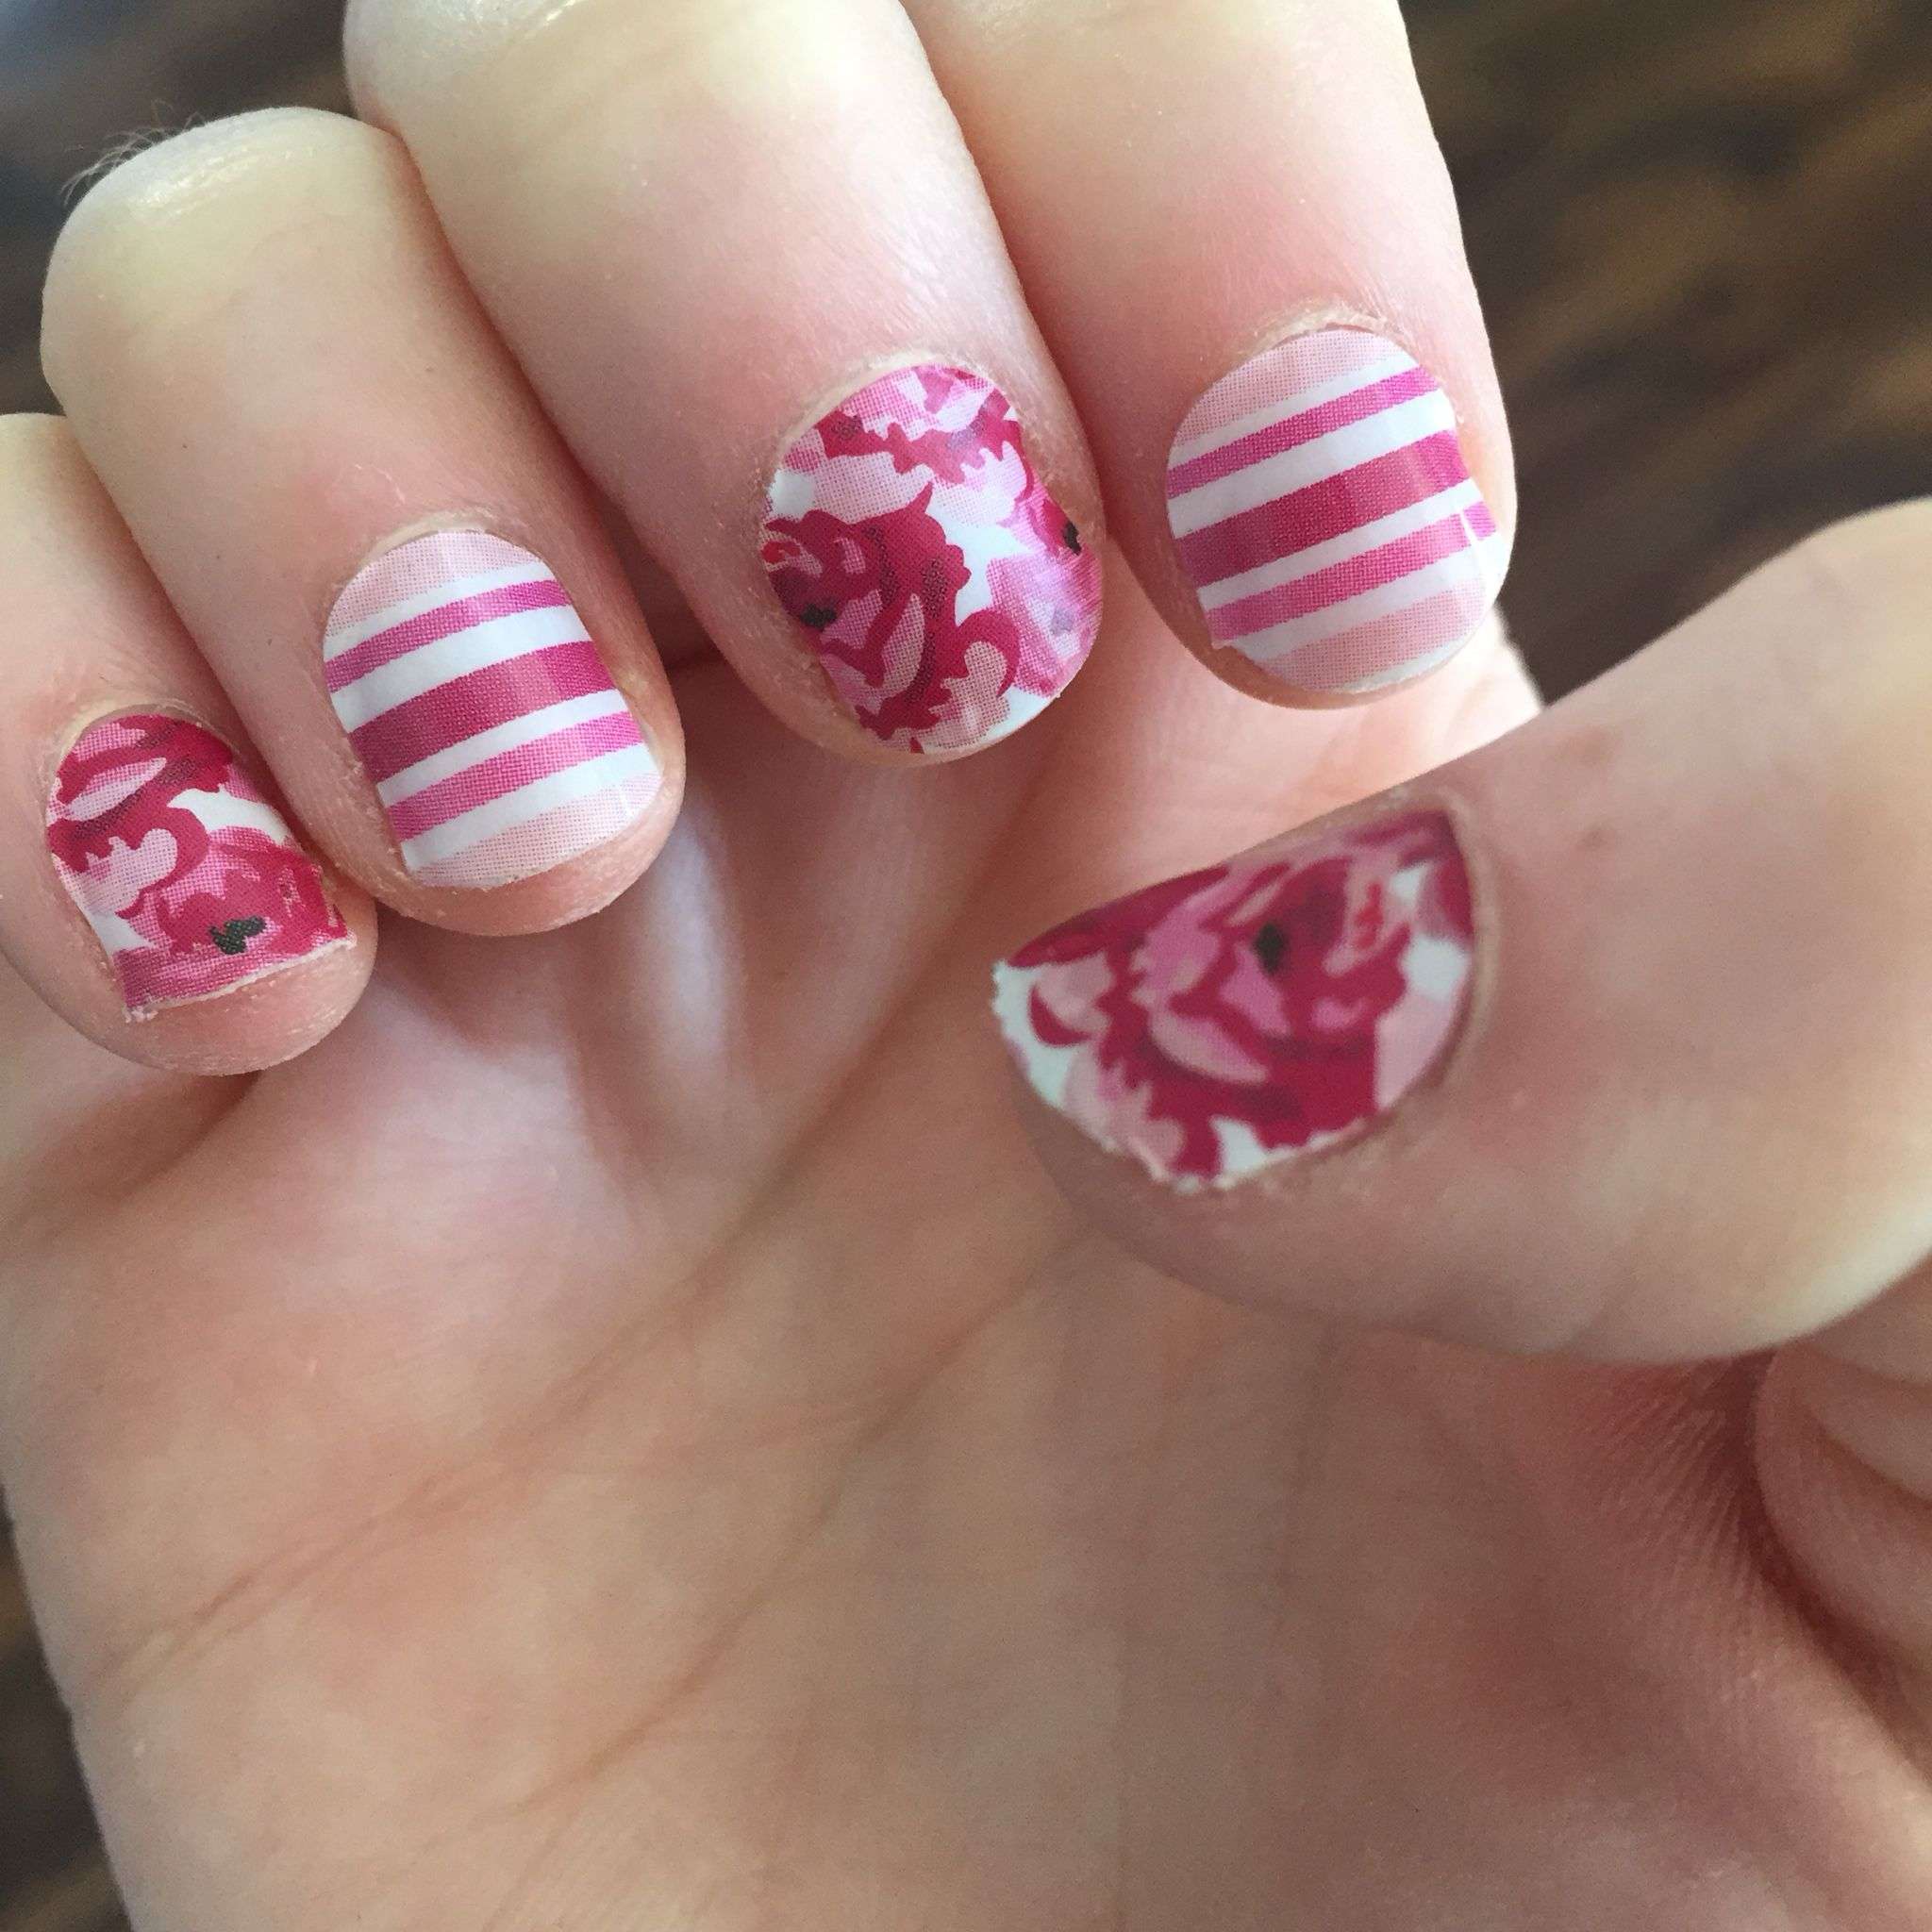 Pin by Jan Farnworth on jamberry nails